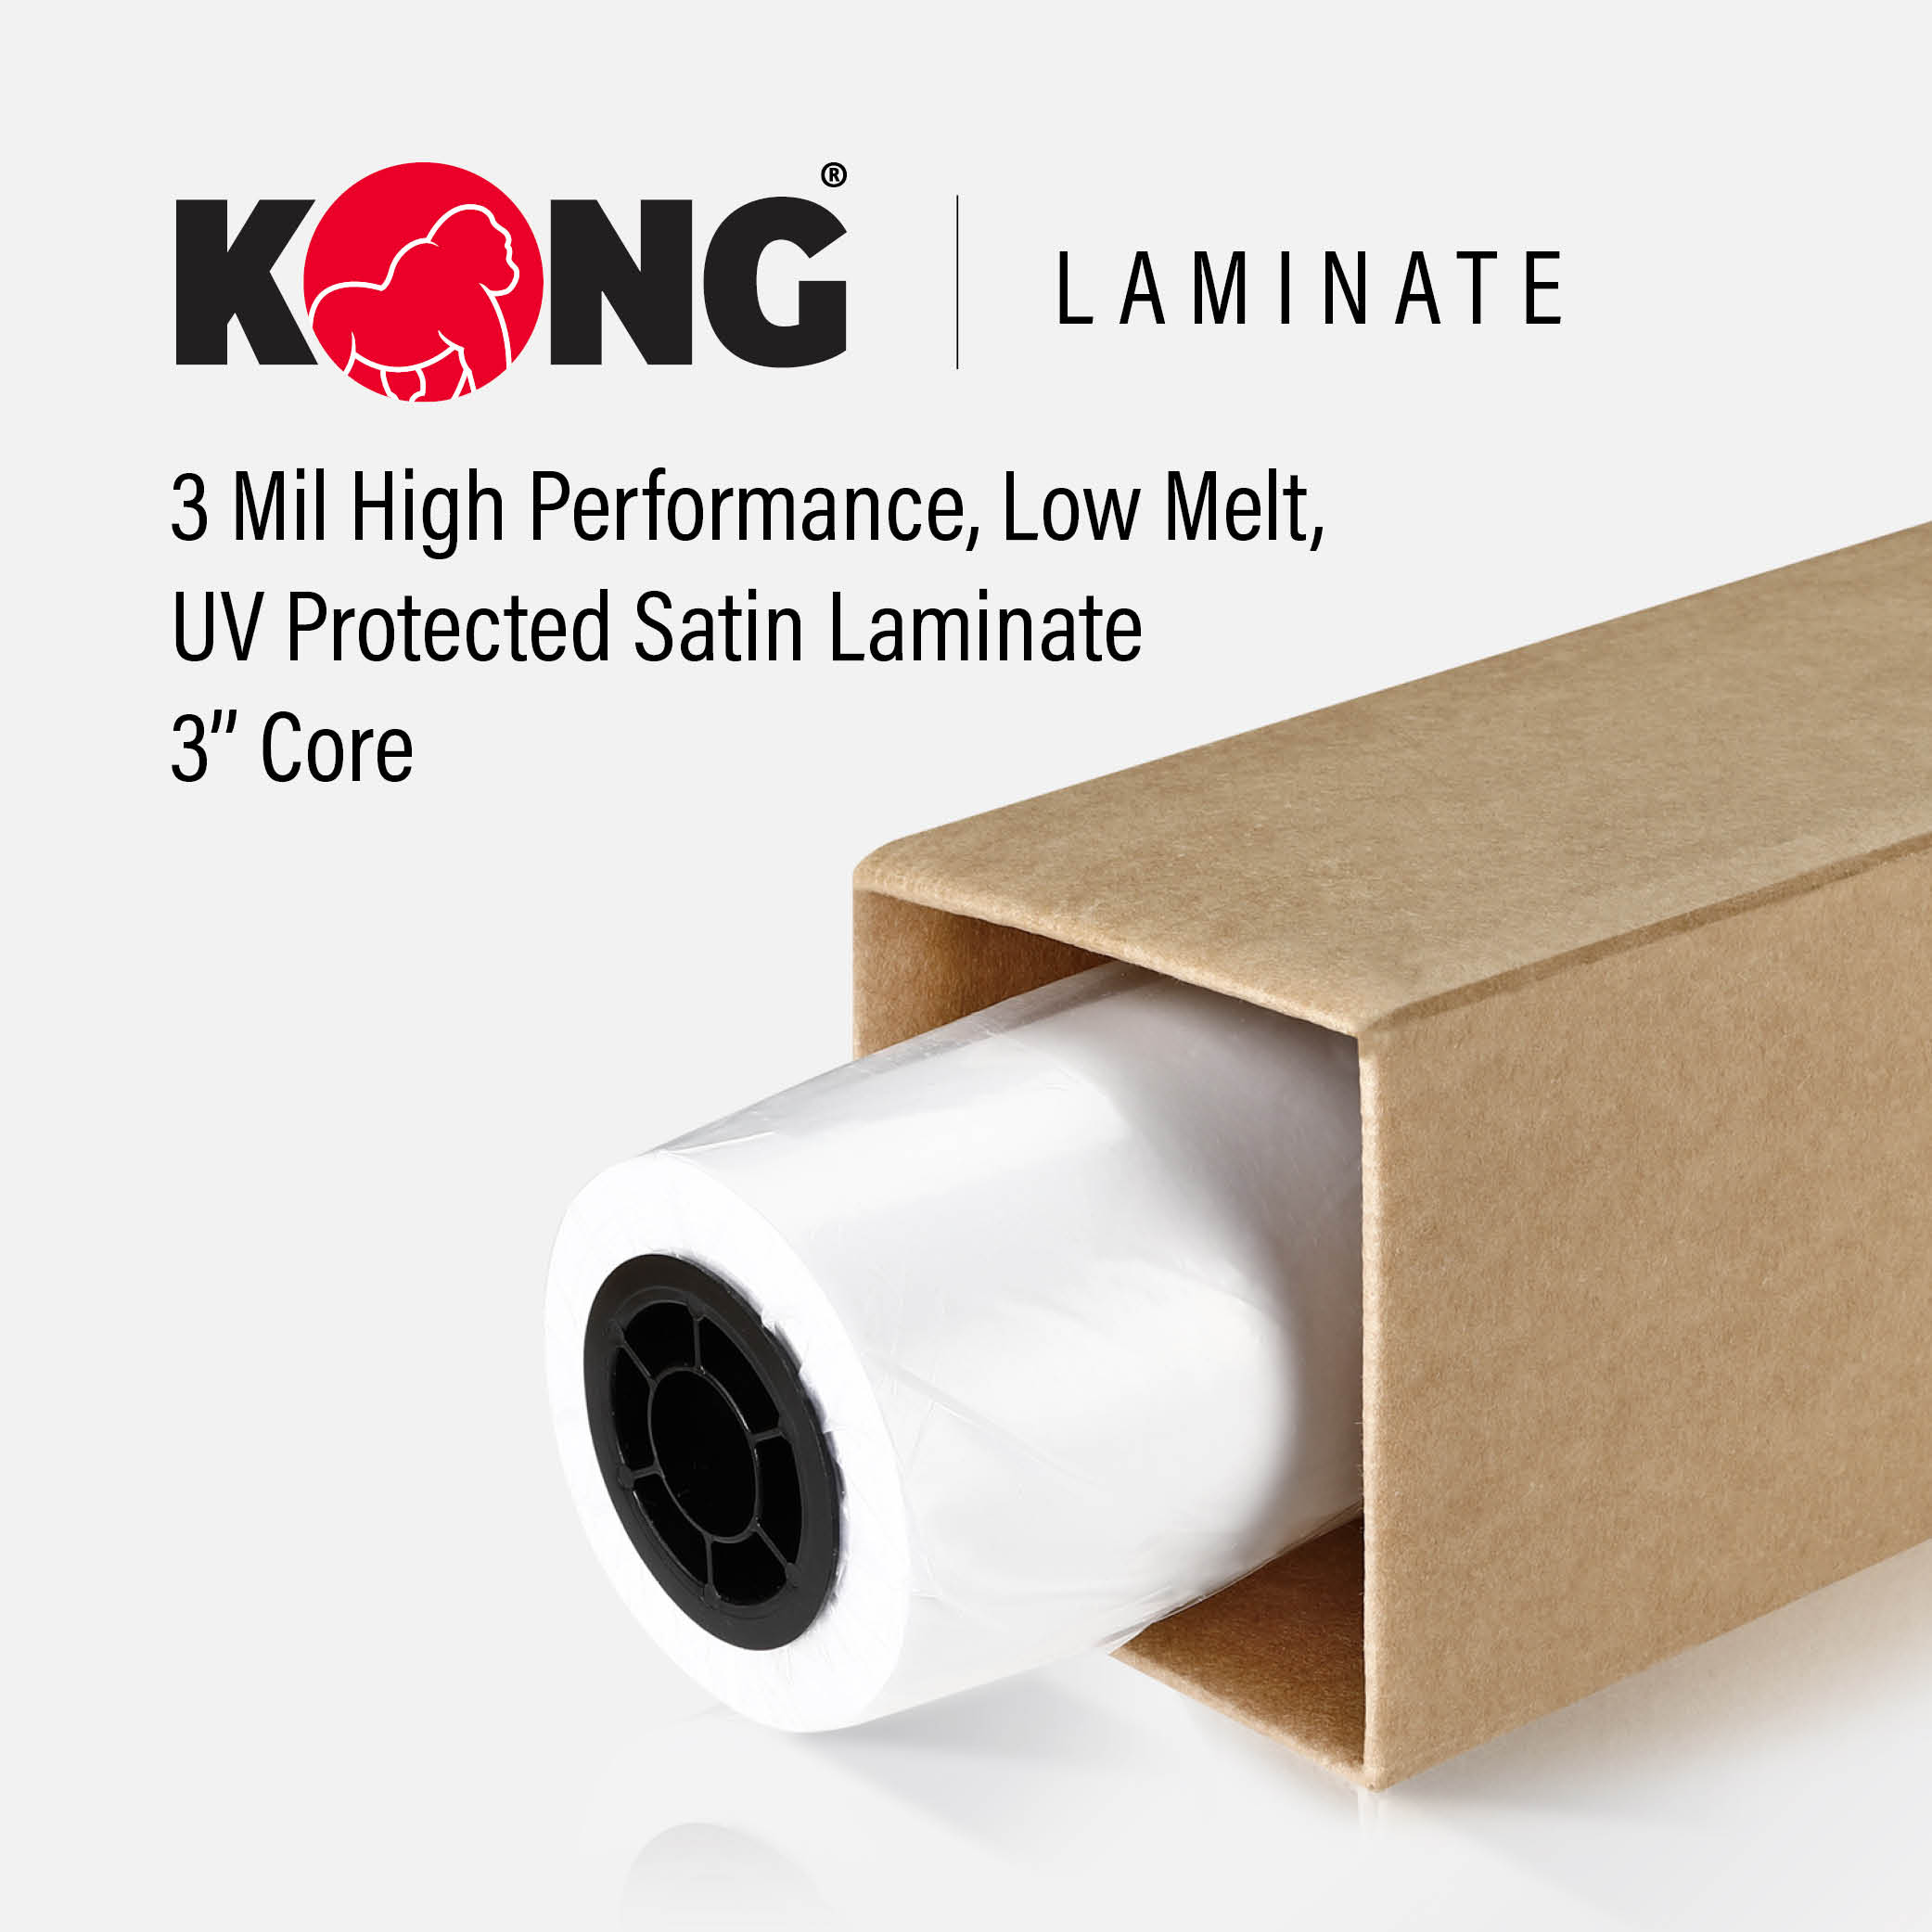 51'' x 500' Roll - 3 MIL High Performance, Low Melt, UV Protected Satin Laminate - 3'' Core